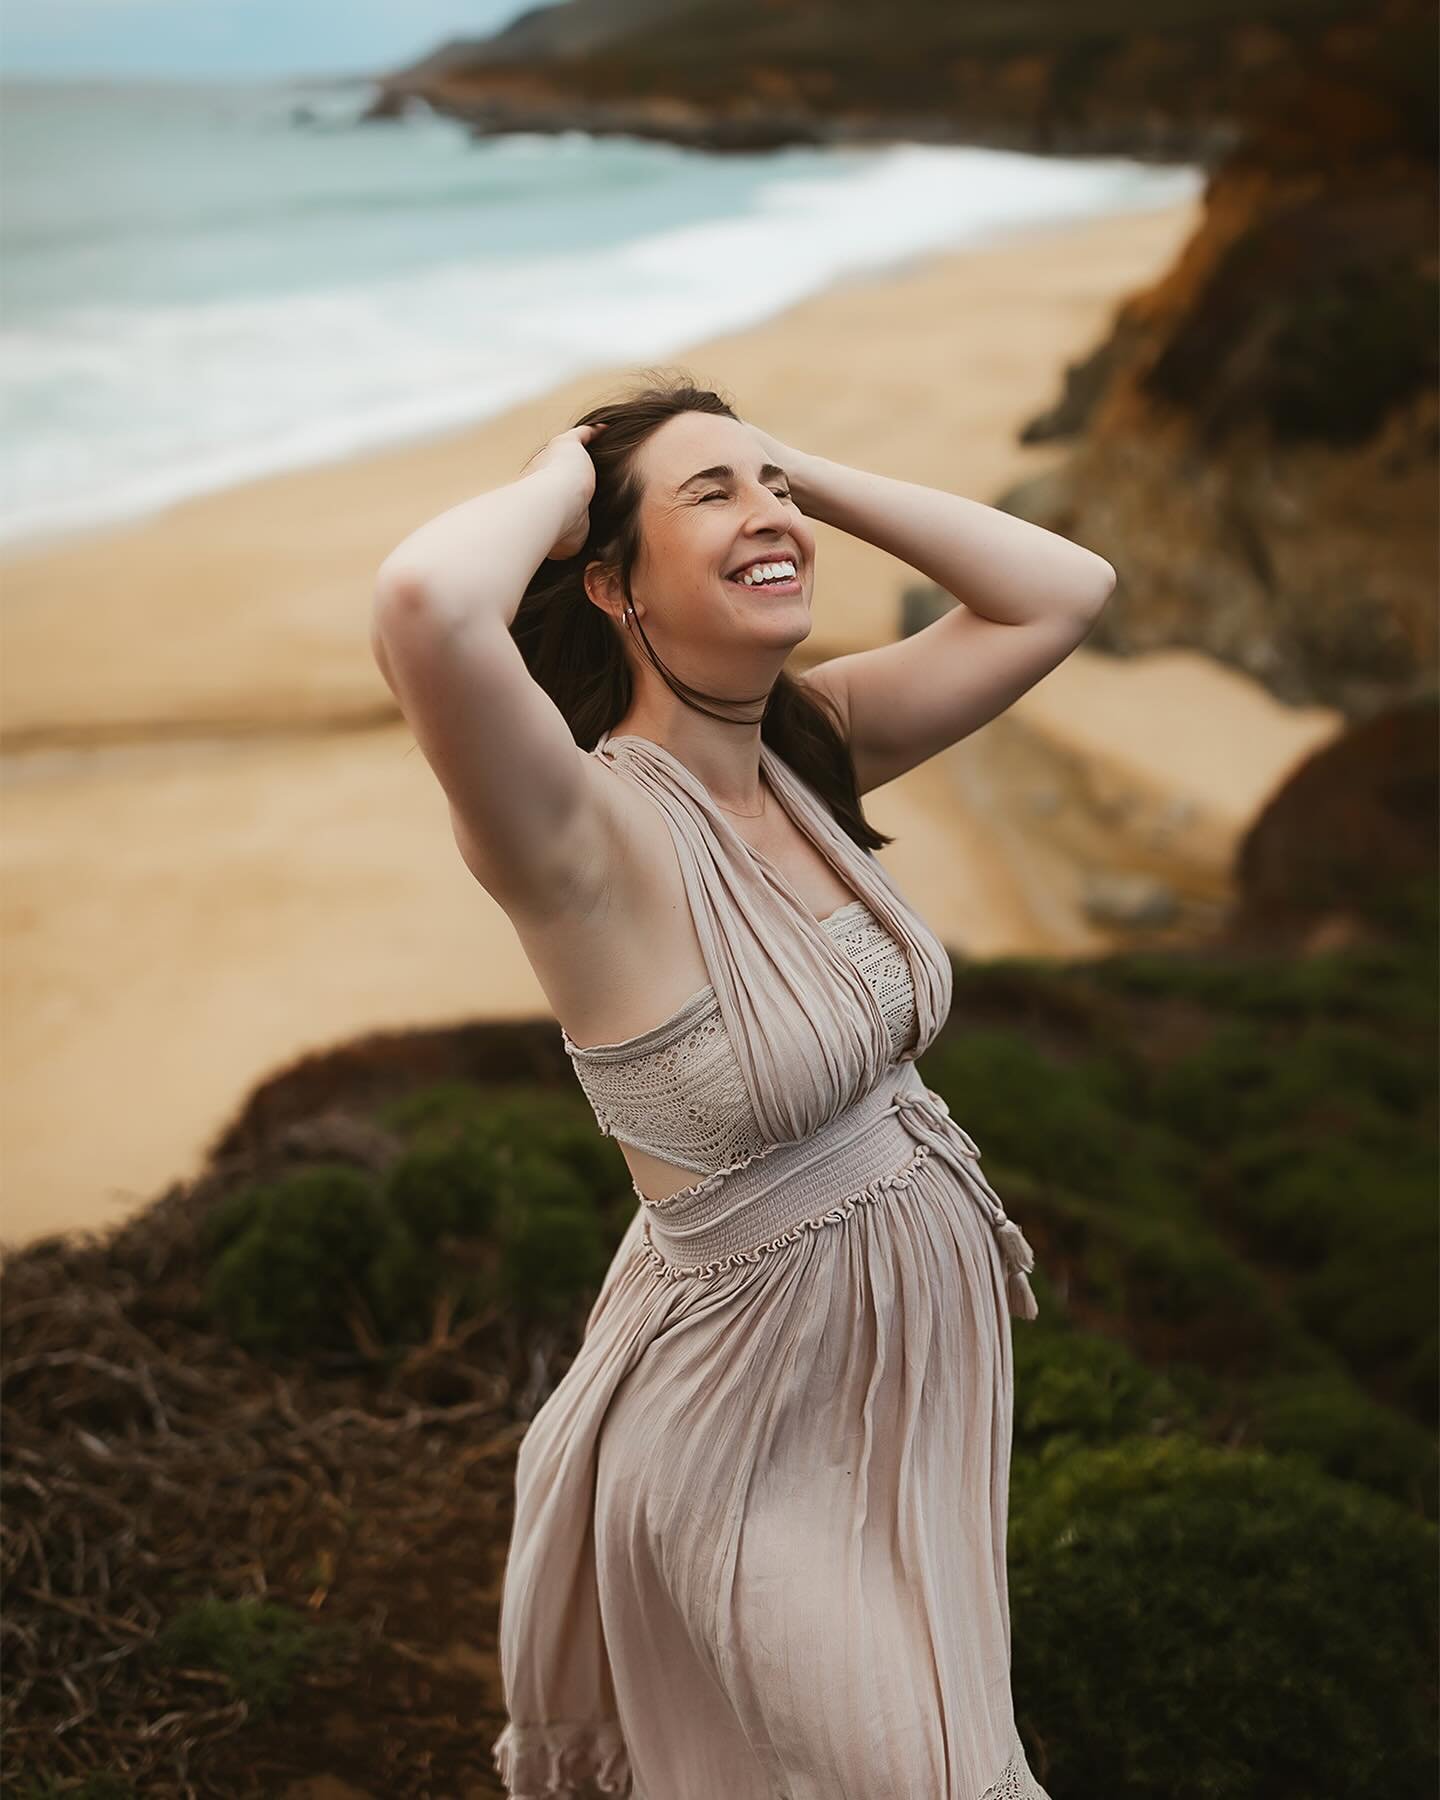 Sharing the last of these pretty beach photos shot in the callalillies near Carmel. Such a beautiful location, and always a pleasure to get to photograph my own friends!! 

Unrelated announcement 1: I&rsquo;m selling my EF Canon 85mm 1.4, and my EF C